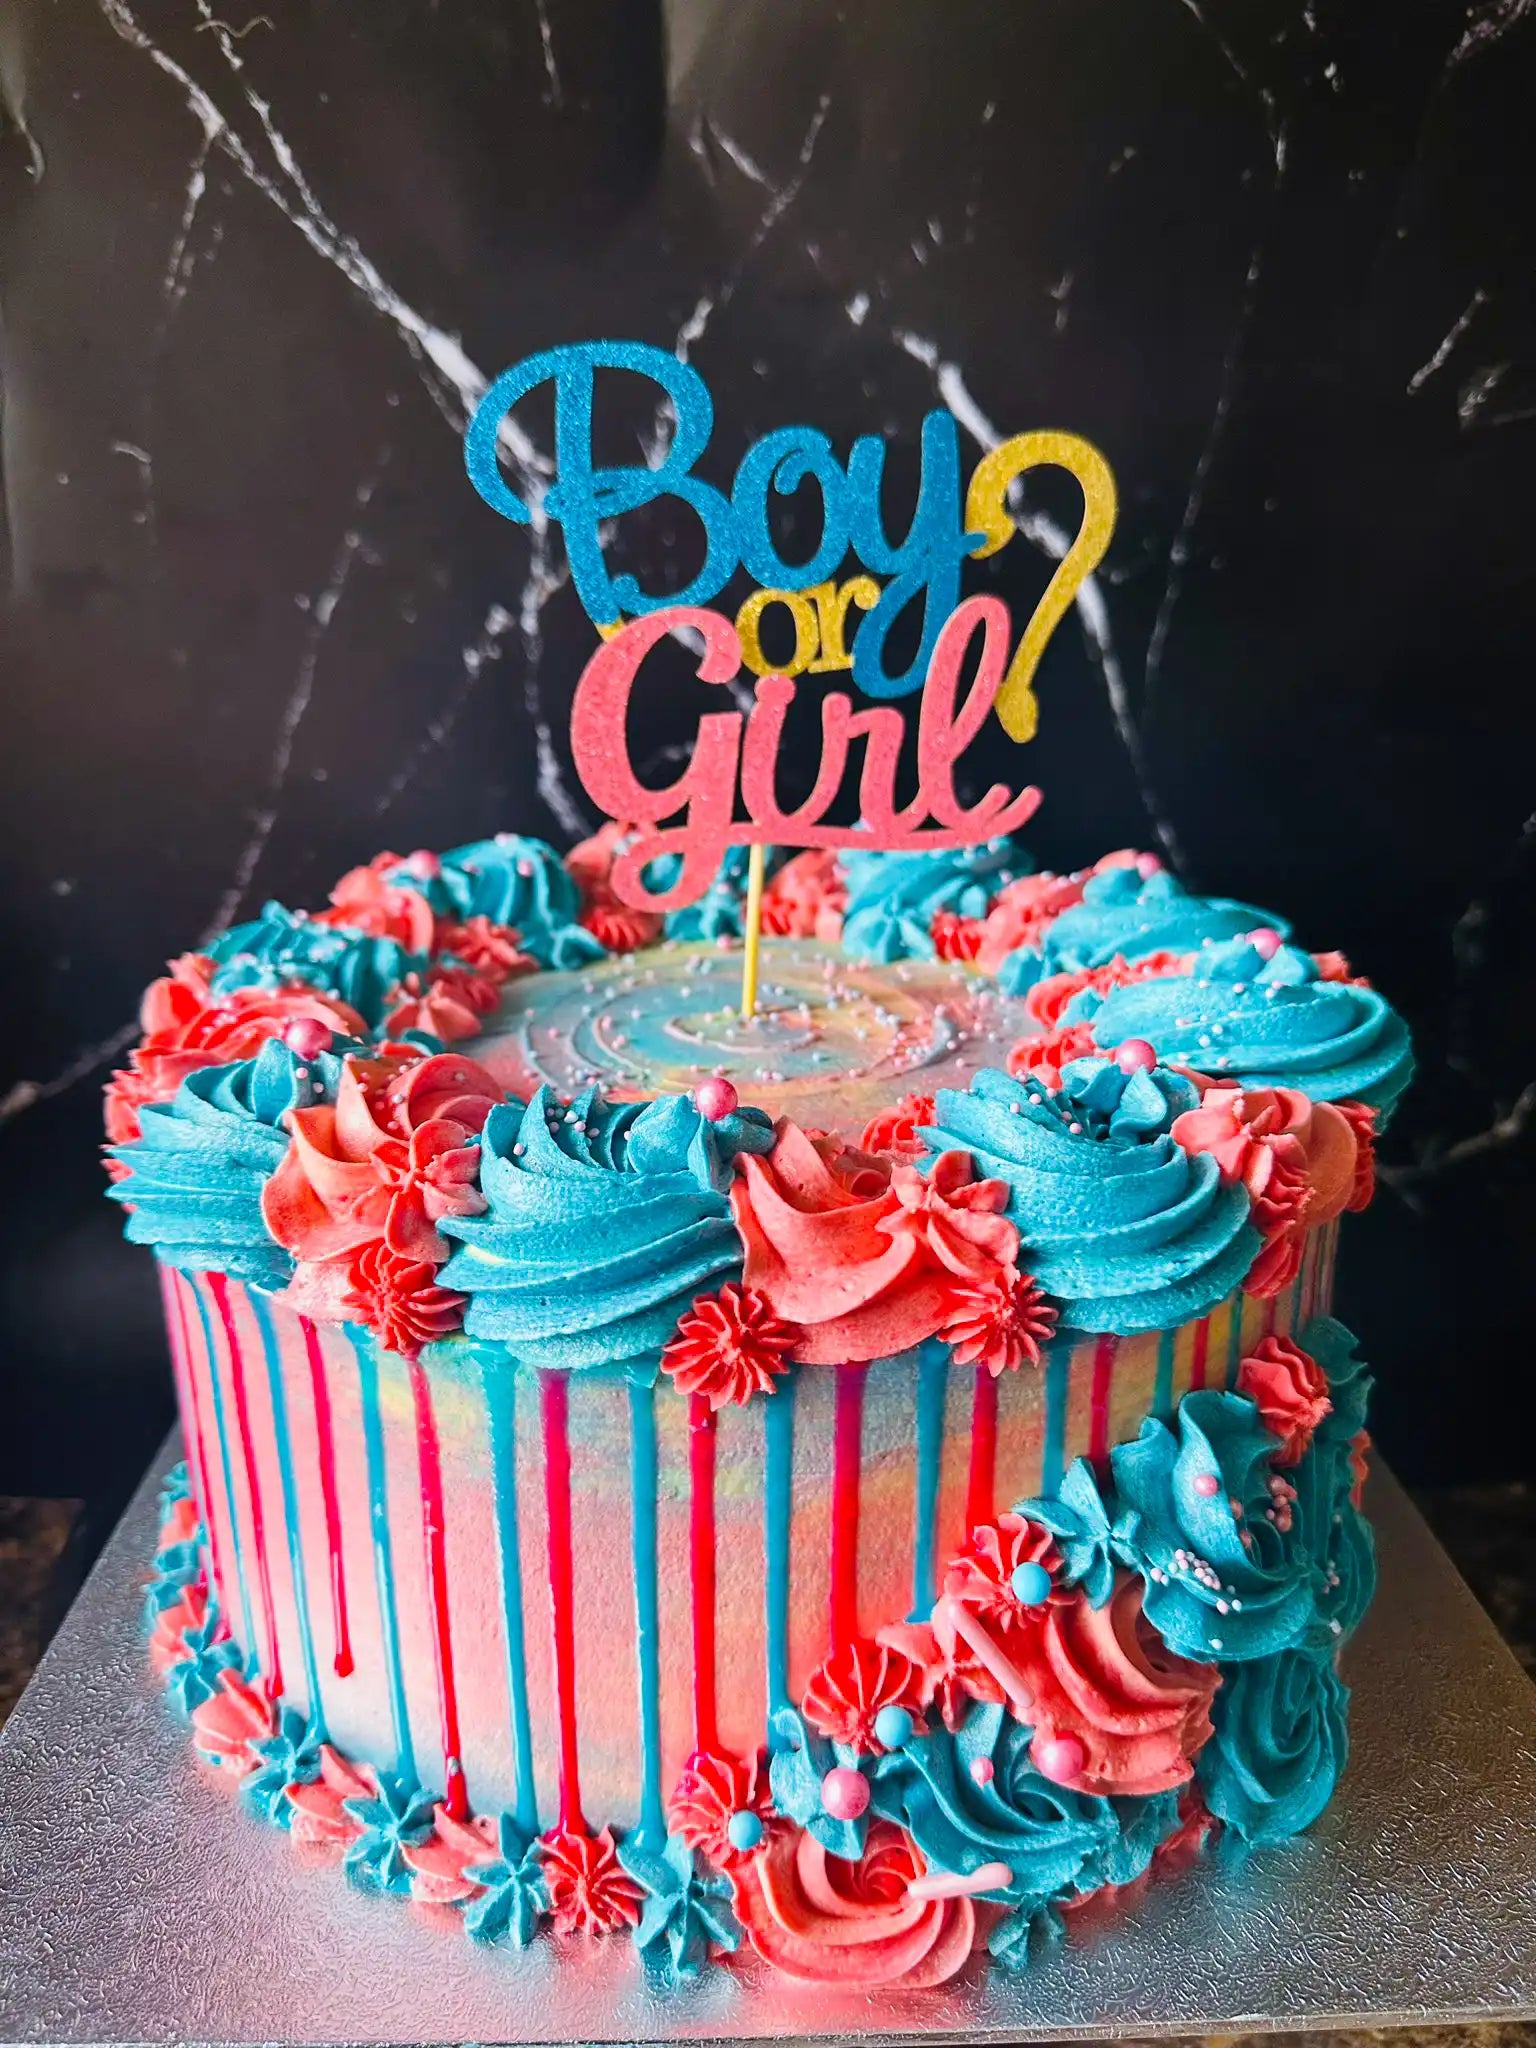 The Best Gender Reveal Cake in Romford and East London - Same and Next Day Delivery - Cake Trays